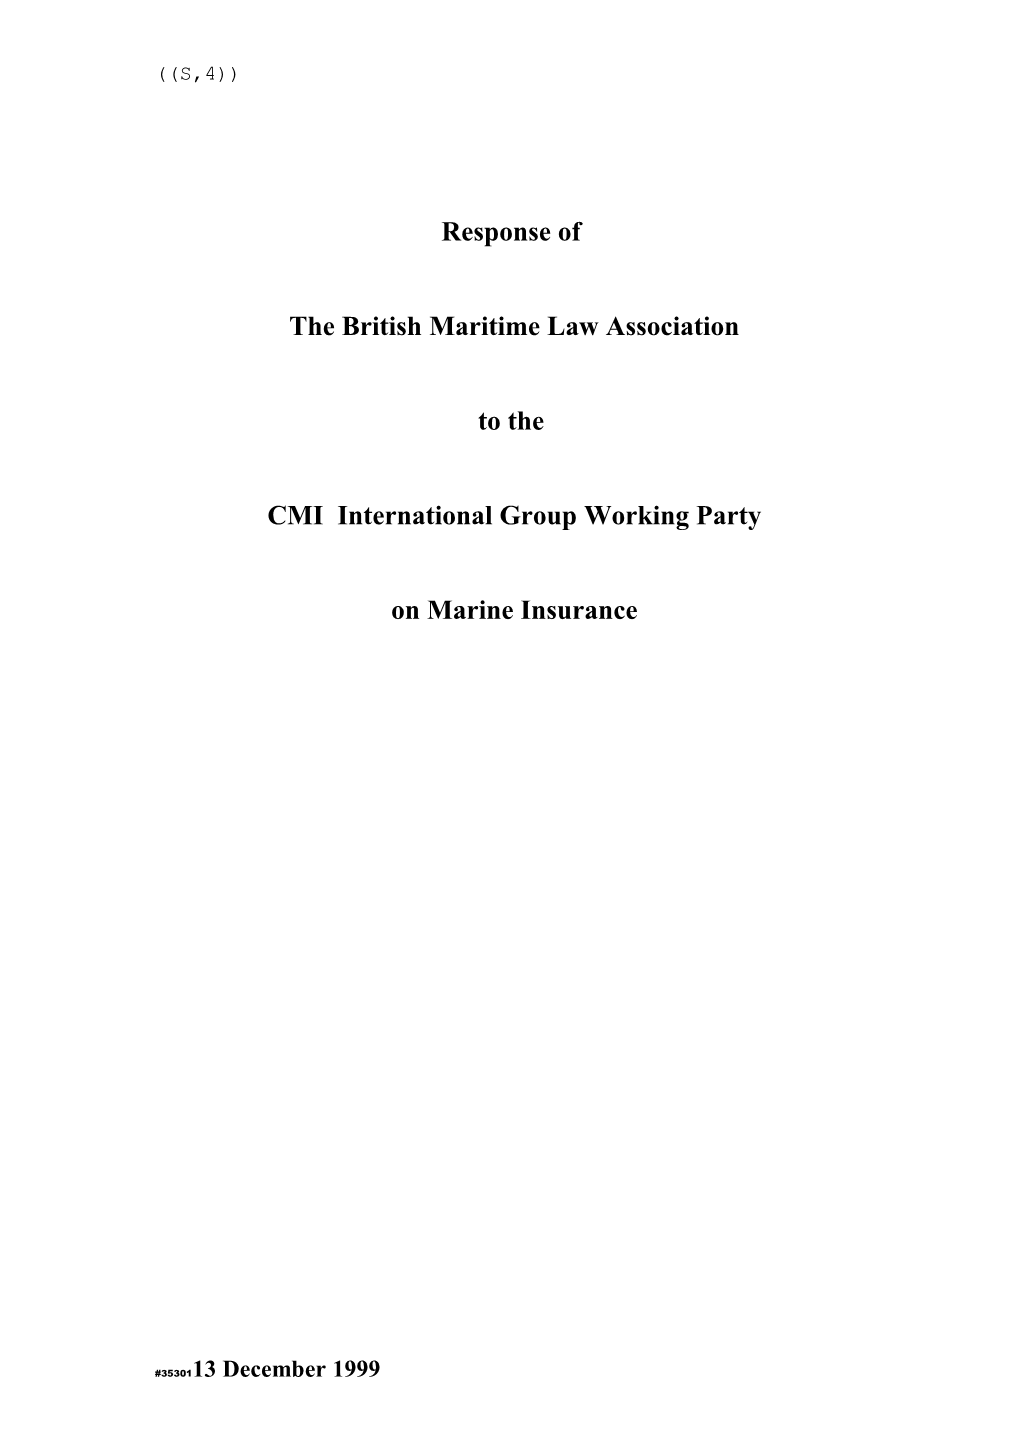 Response of BMLA to the CMI International Working Group